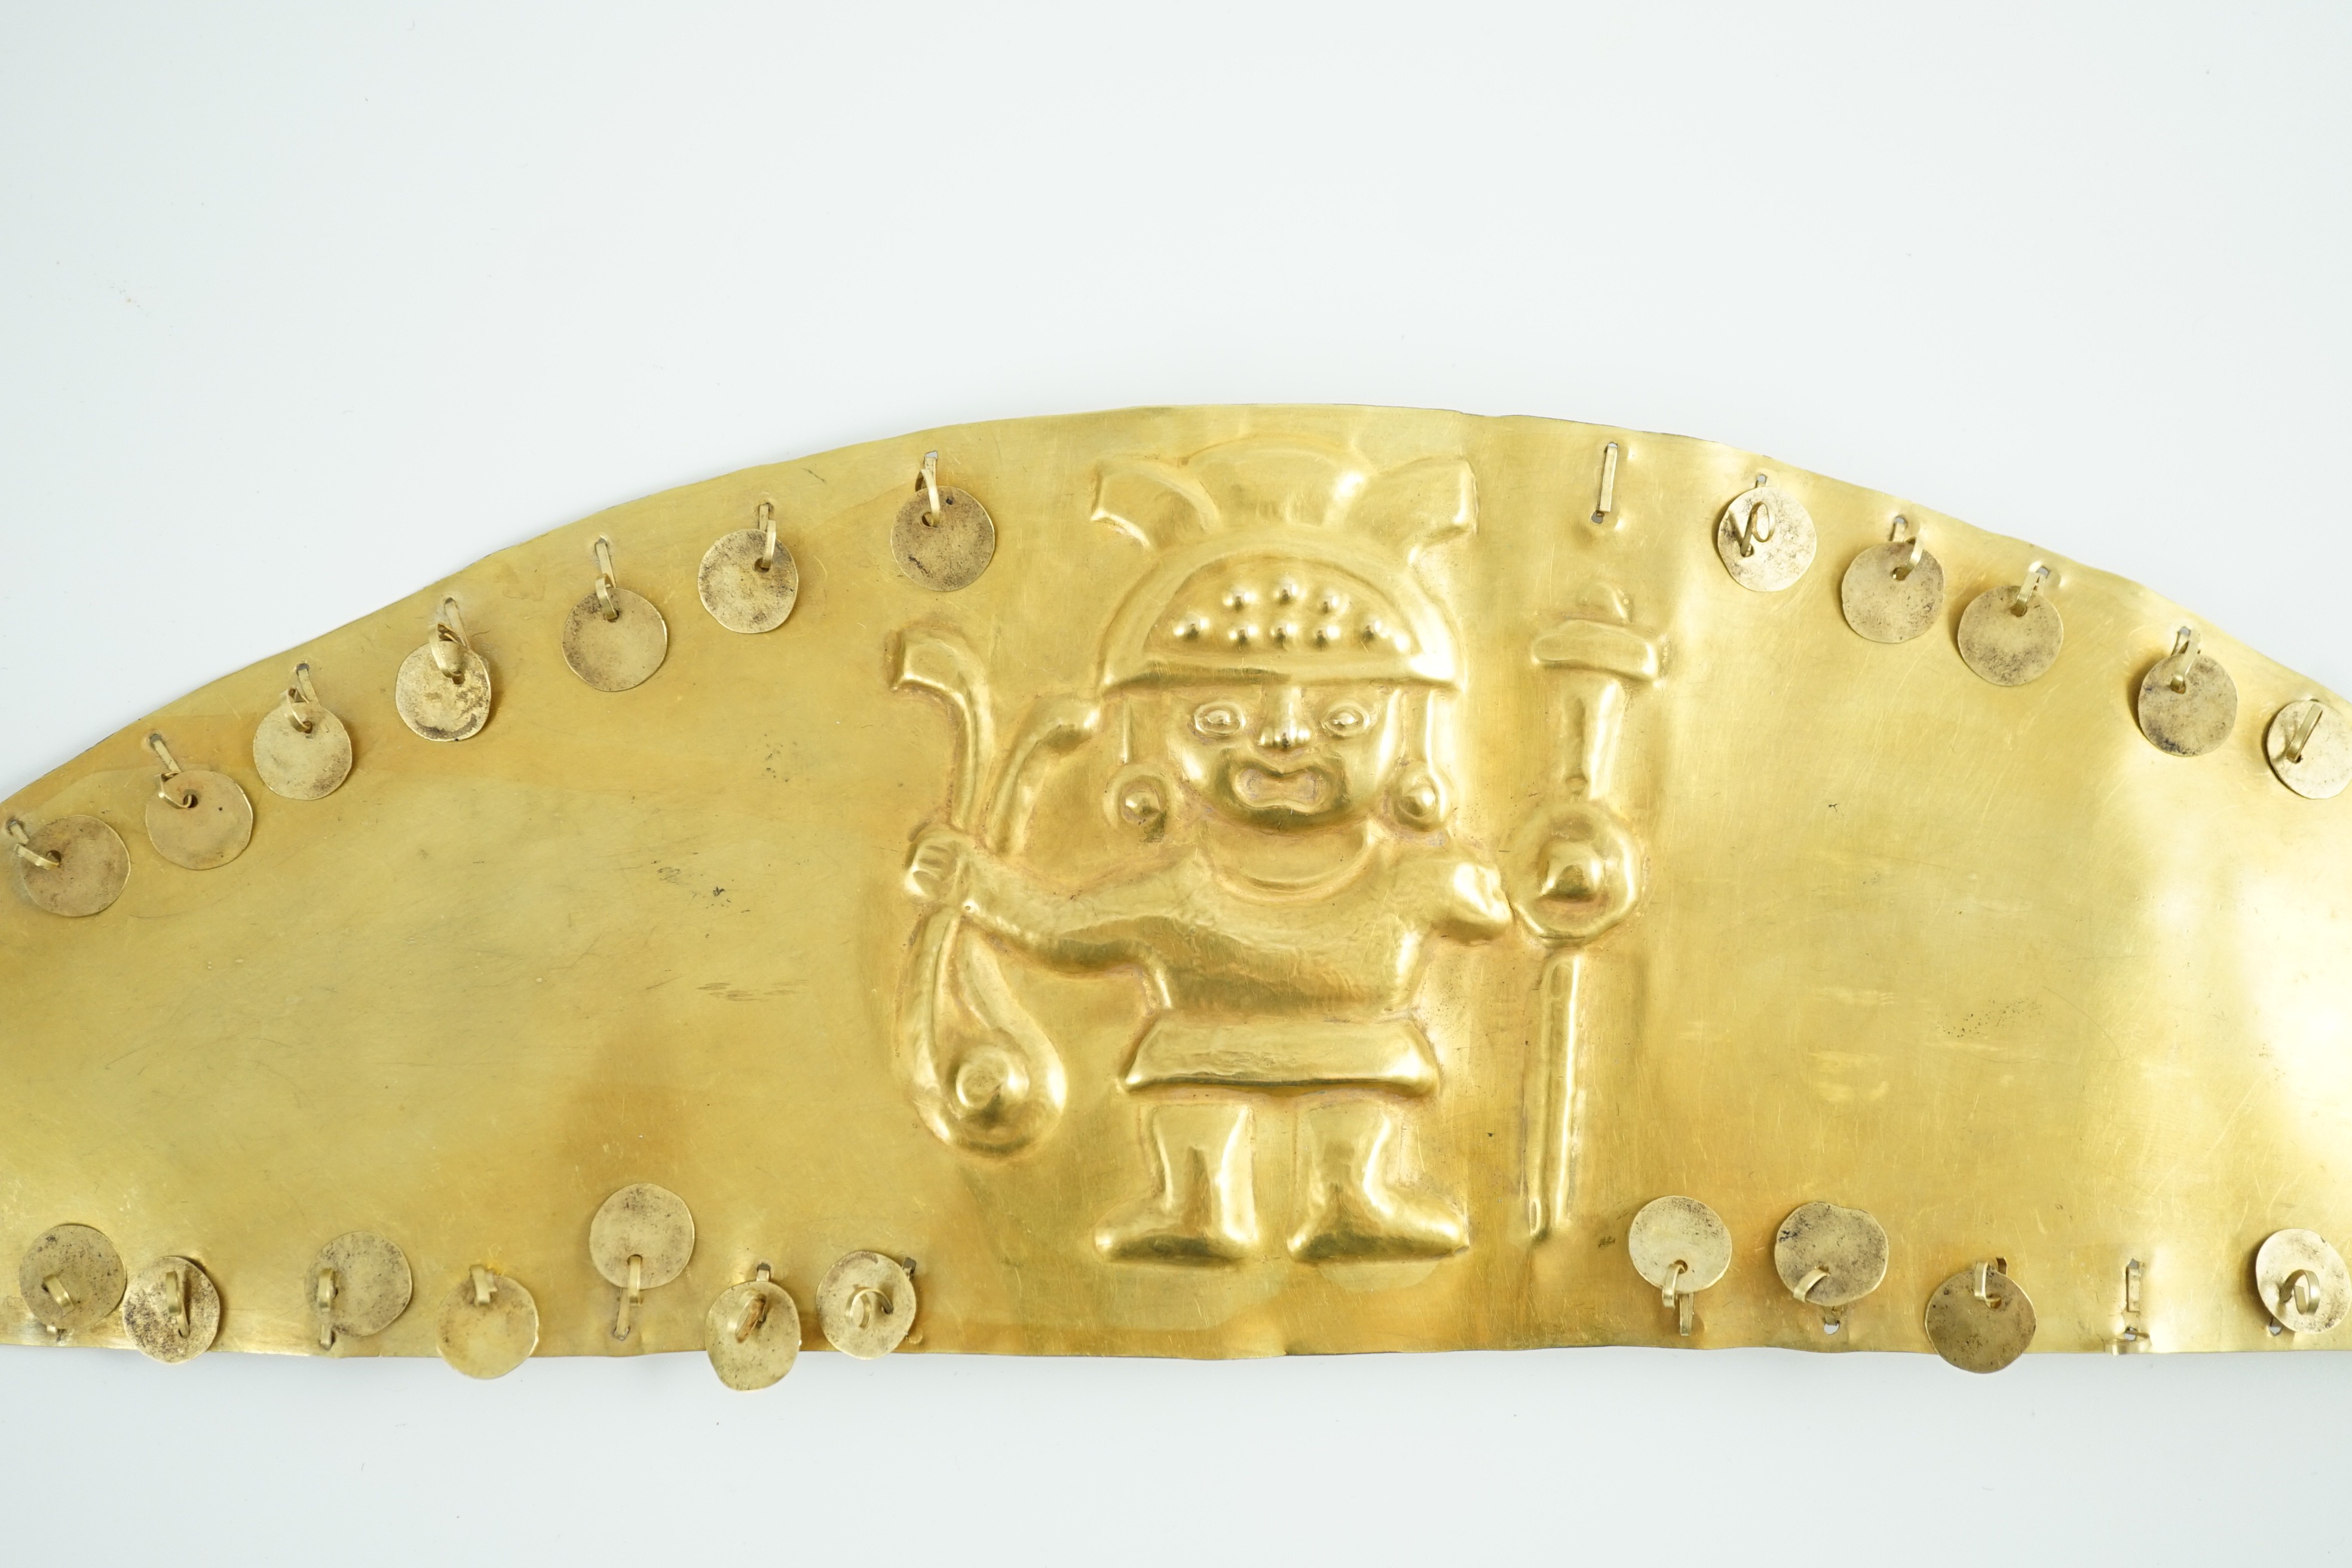 A rare pre-Columbian sheet gold headdress or breast plate, possibly Moche culture, Northern Peru, A.D. 200 - 850, 36cm wide 9.7cm high, weight 130g